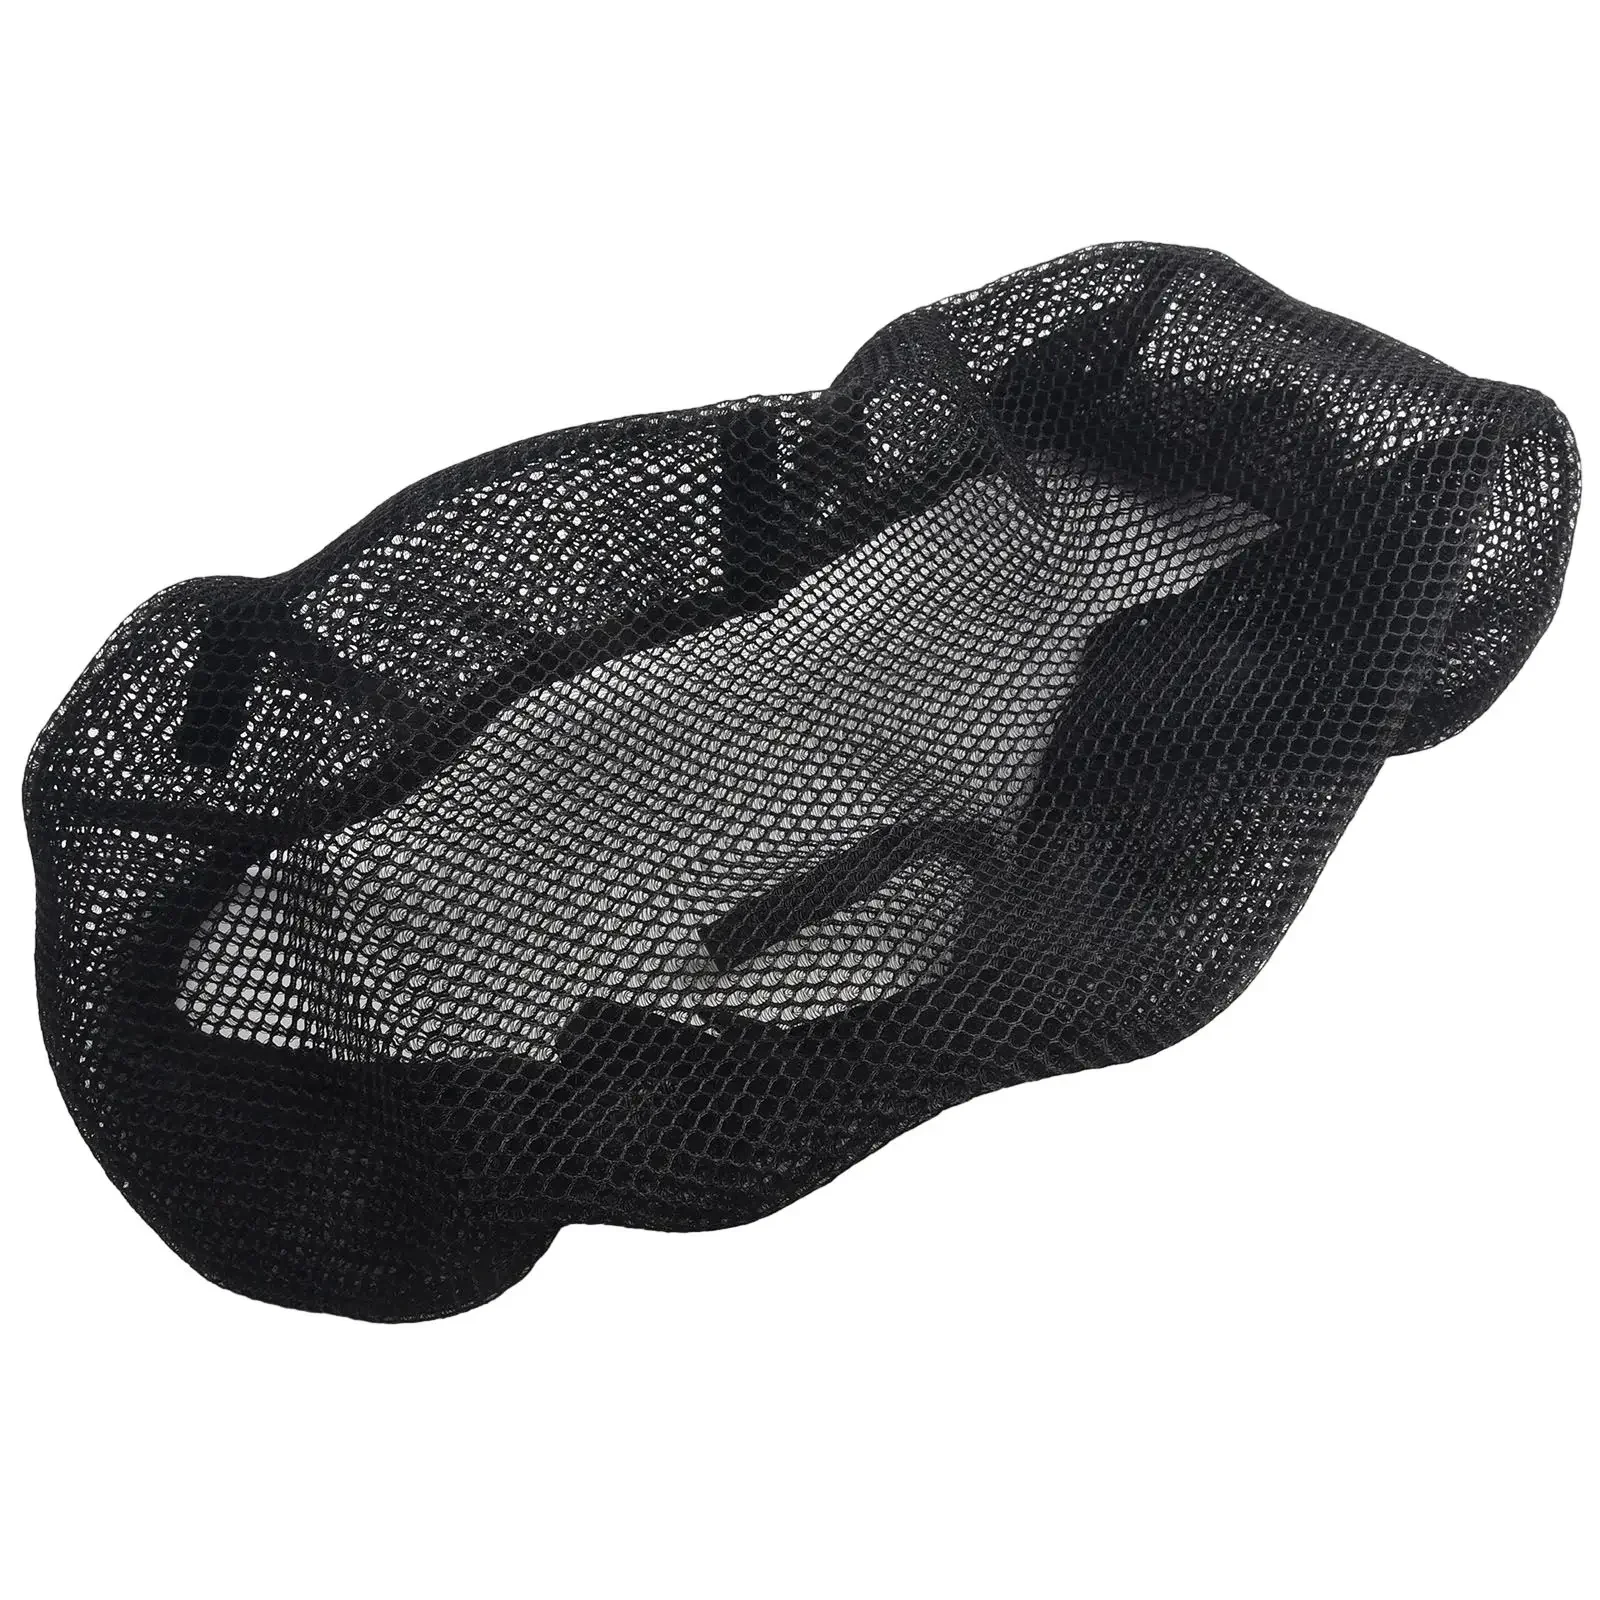 

Motorcycle Cushion Cover 1 Pcs 75*58CM Anti-Slip Black Mesh Net Motorcycle Accessories Replacement High Quality Practical To Use